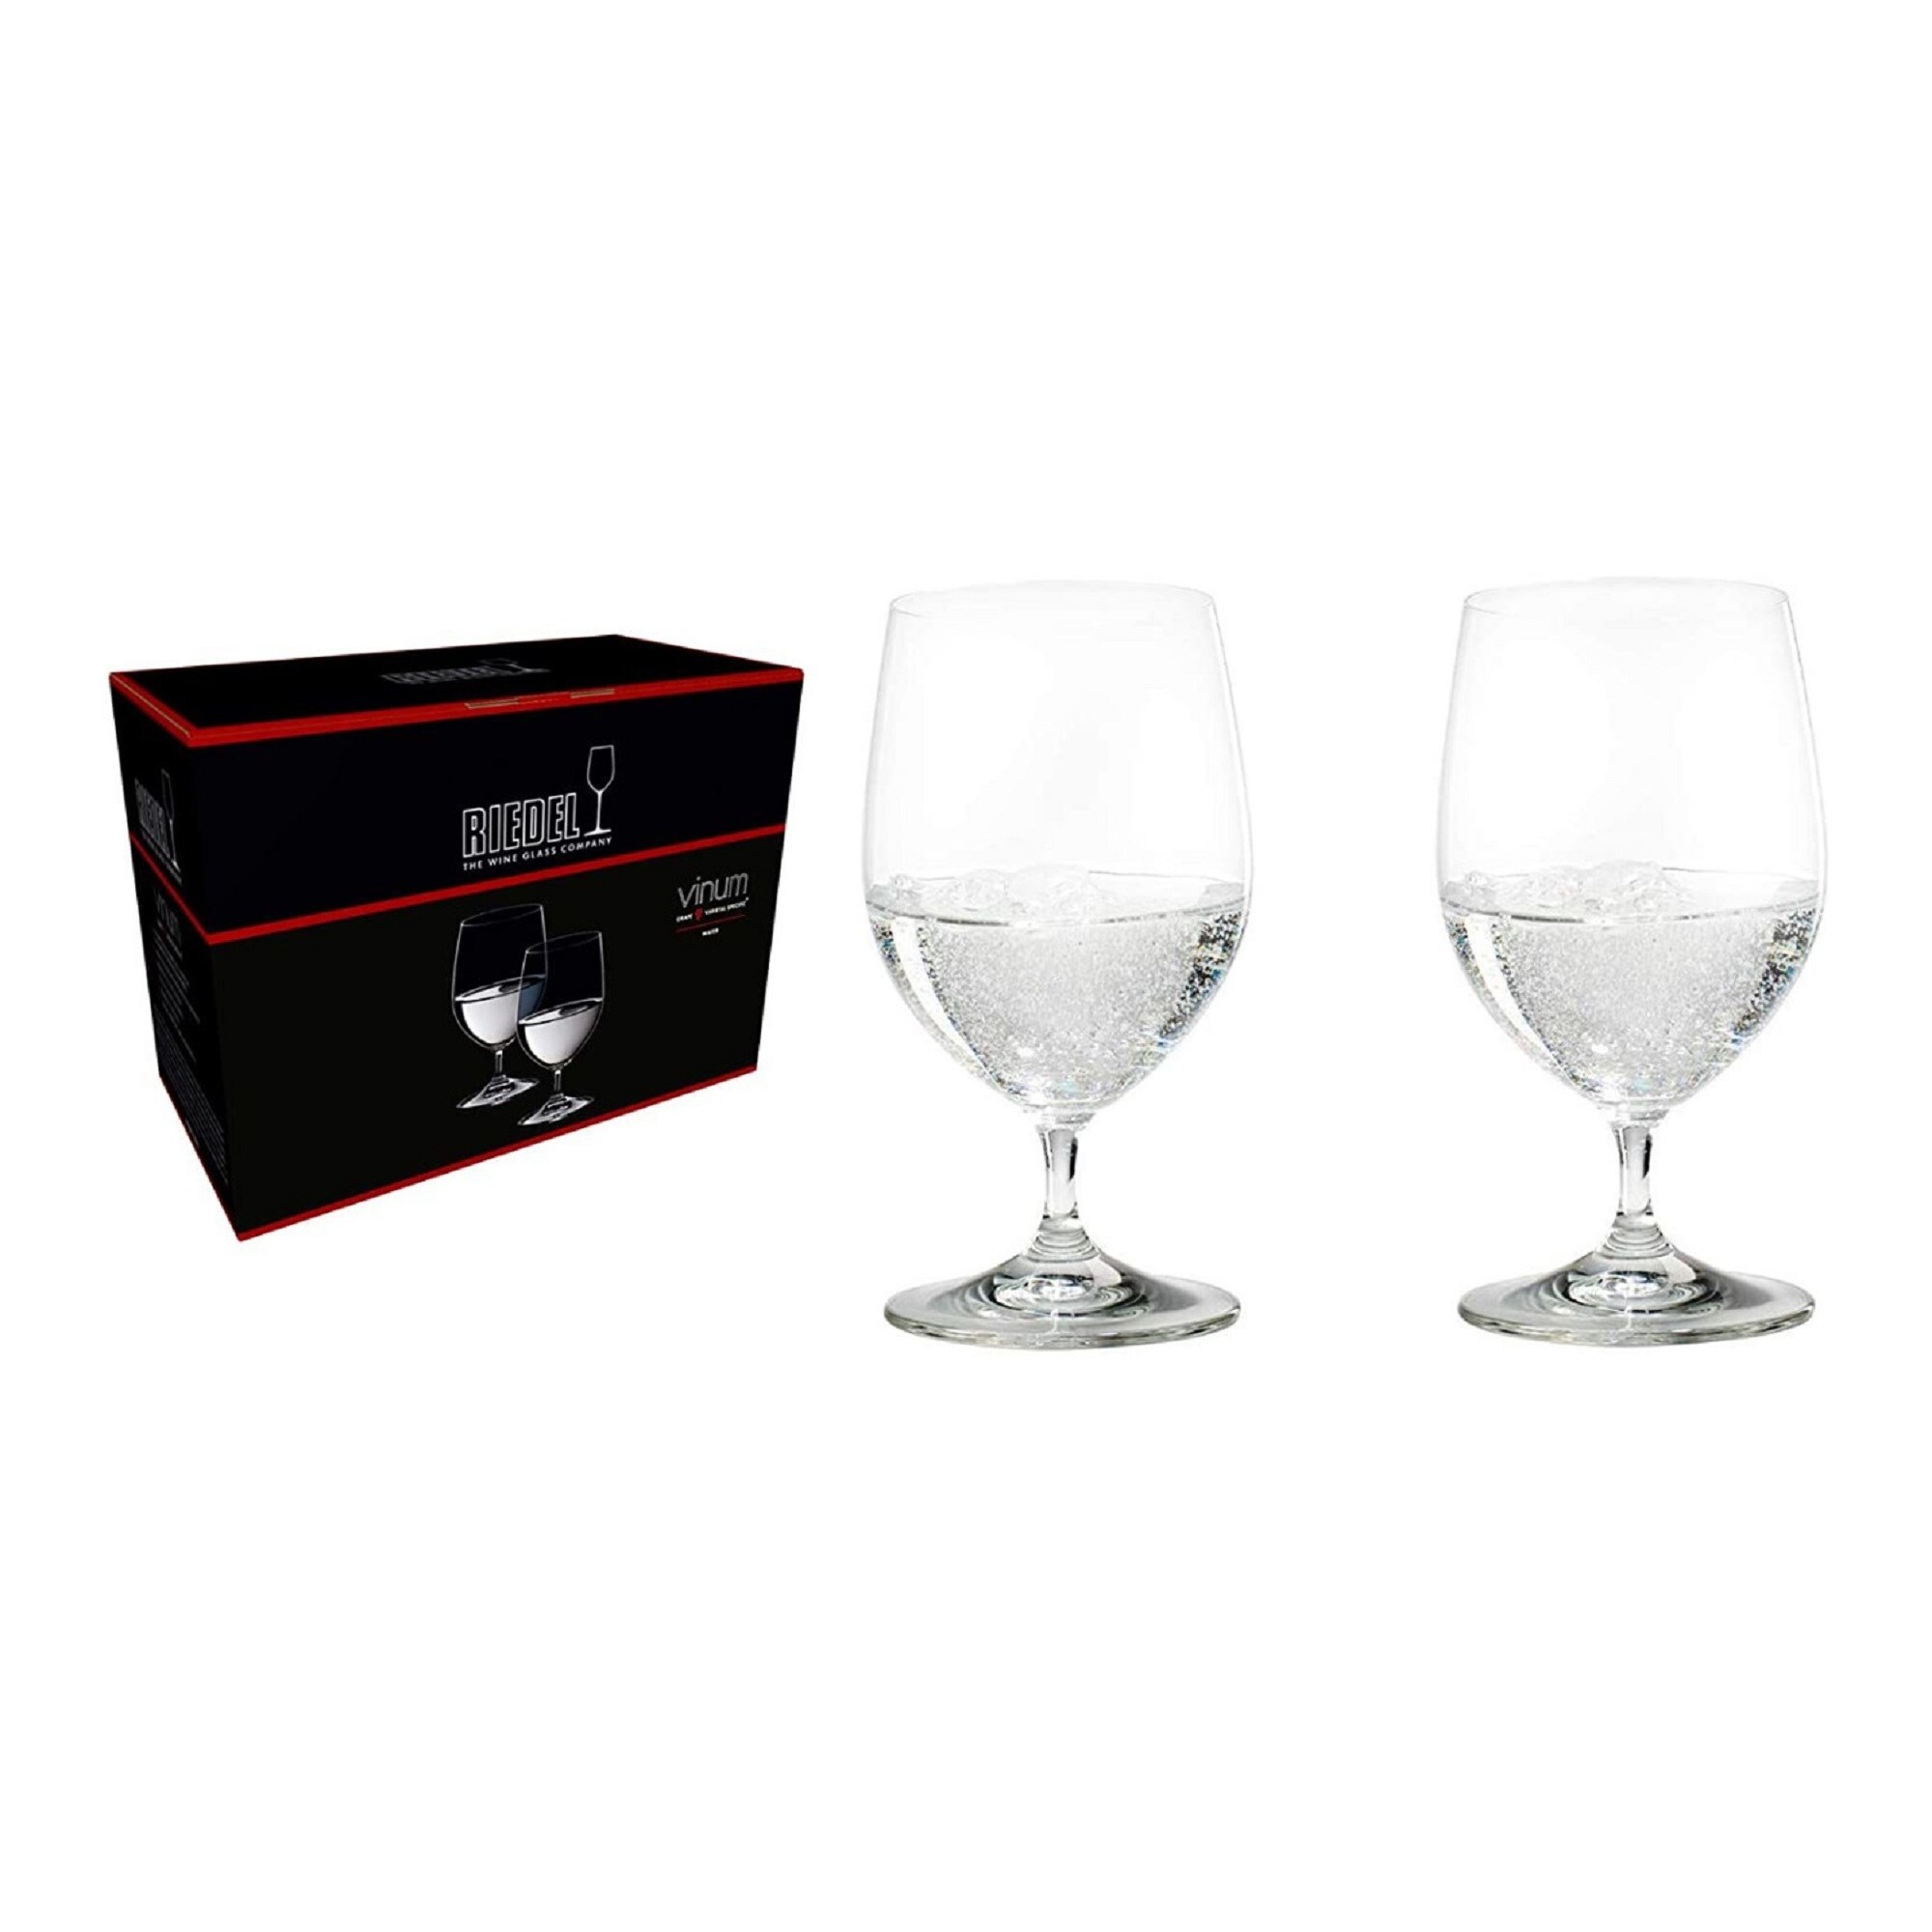 https://ak1.ostkcdn.com/images/products/is/images/direct/44bcd08614faaff57462b1edebe06b34909095e2/Riedel-Vinum-Water-Glass-%28Set-of-2%29.jpg